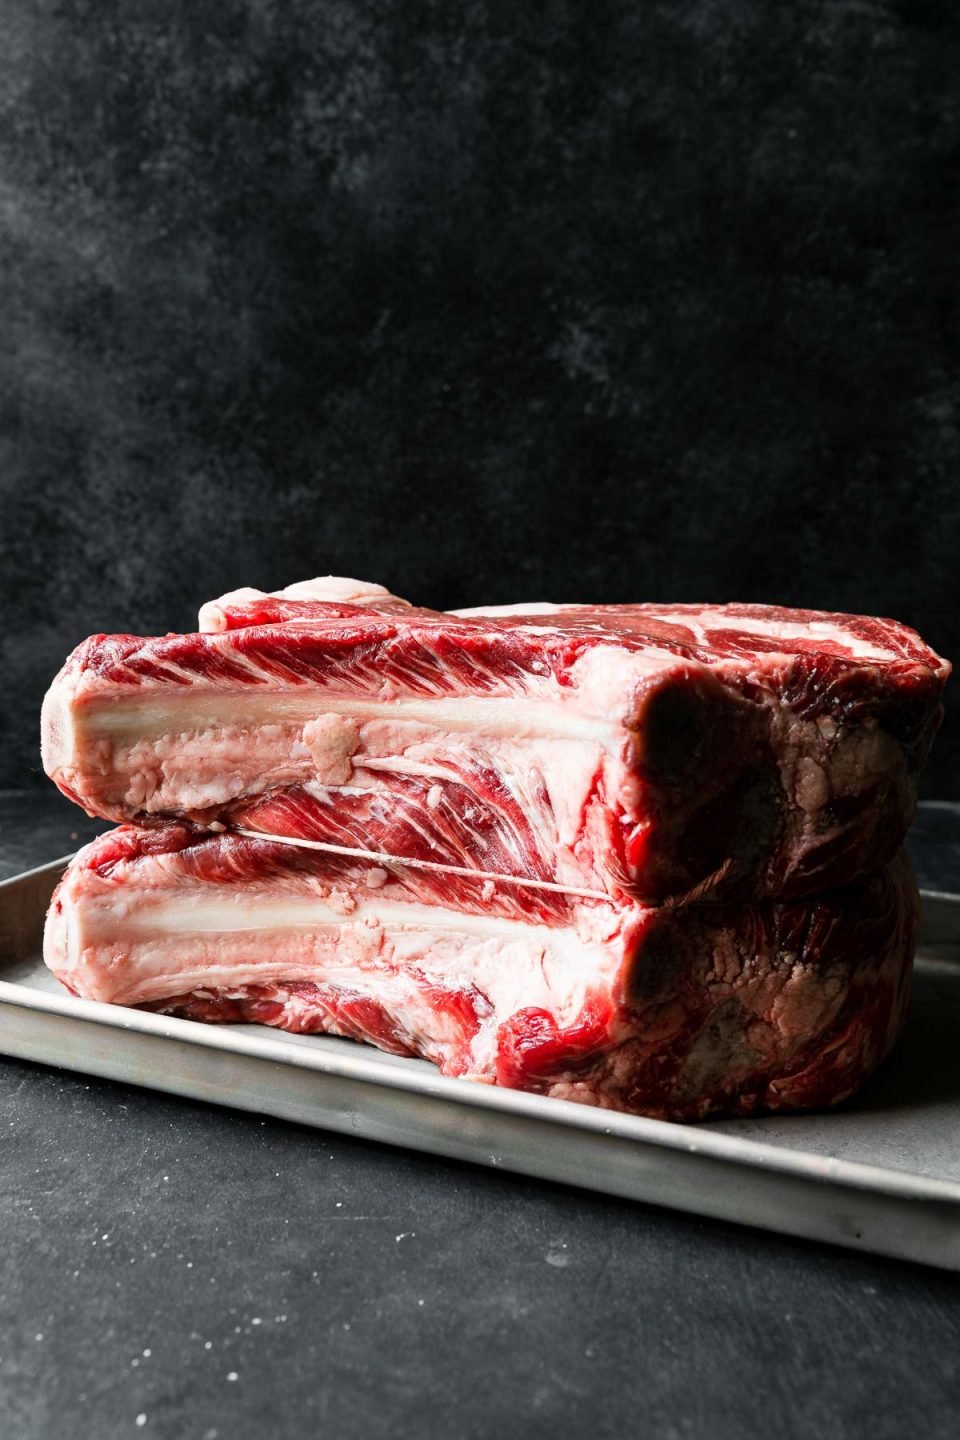 A side angle shot of a bone-in standing beef rib roast for prime rib turned on its side & sitting atop an aluminum baking sheet. The prime rib roast bones have been sliced off and then tied back on with kitchen twine. The baking sheet rests atop a dark textured surface with a dark textured background set behind it.